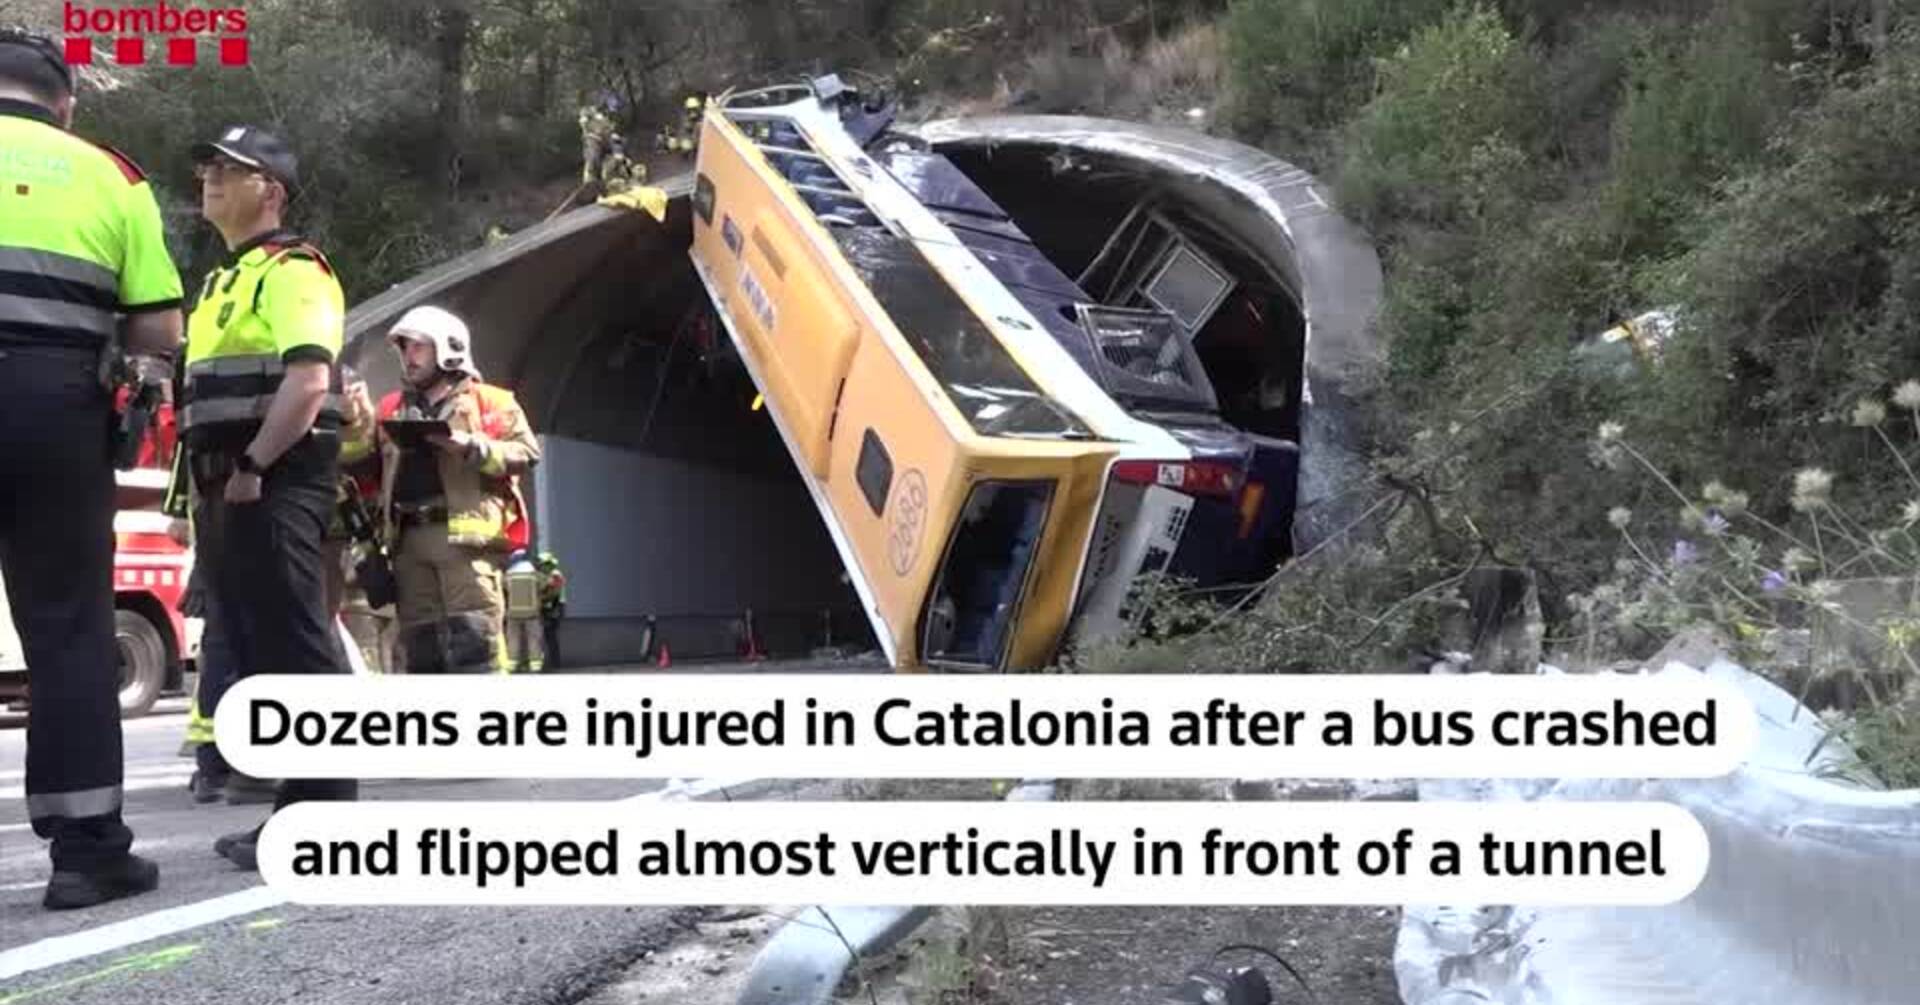 Spanish bus flips, gets wedged in tunnel entrance, injuring dozens